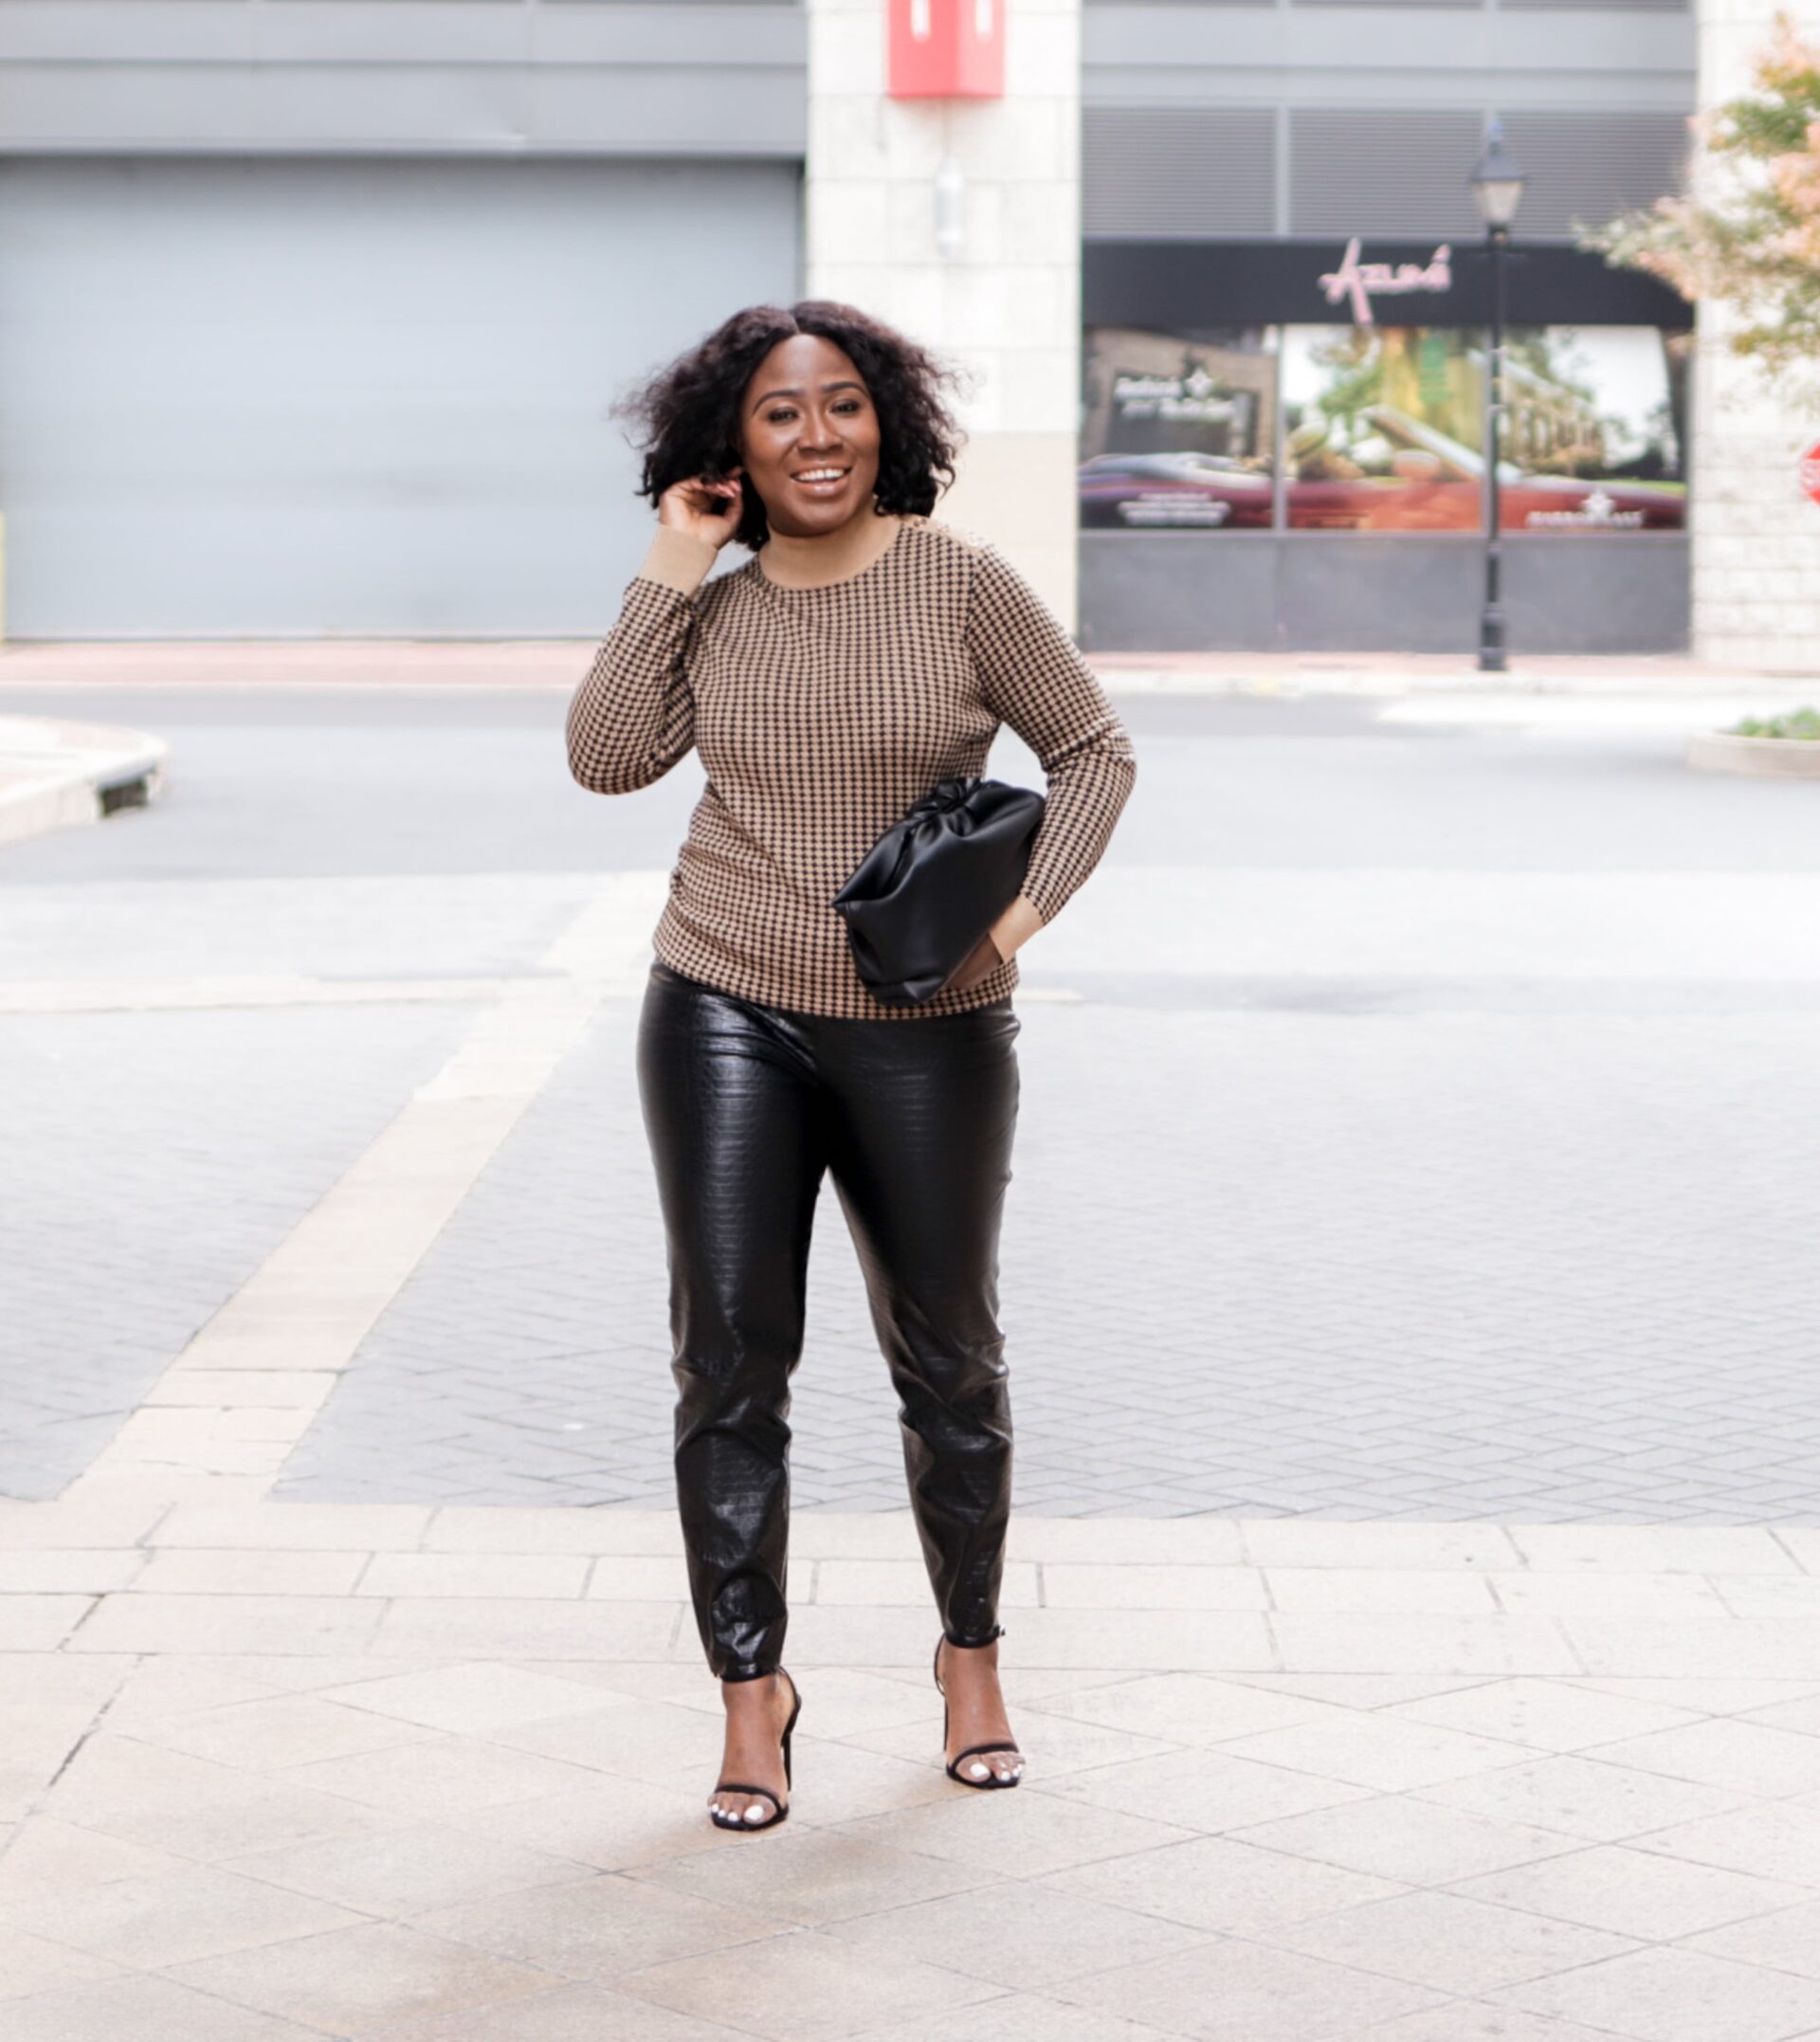 HOW TO STYLE A BLACK LEATHER PANTS – HER MILLENNIAL CLOSET